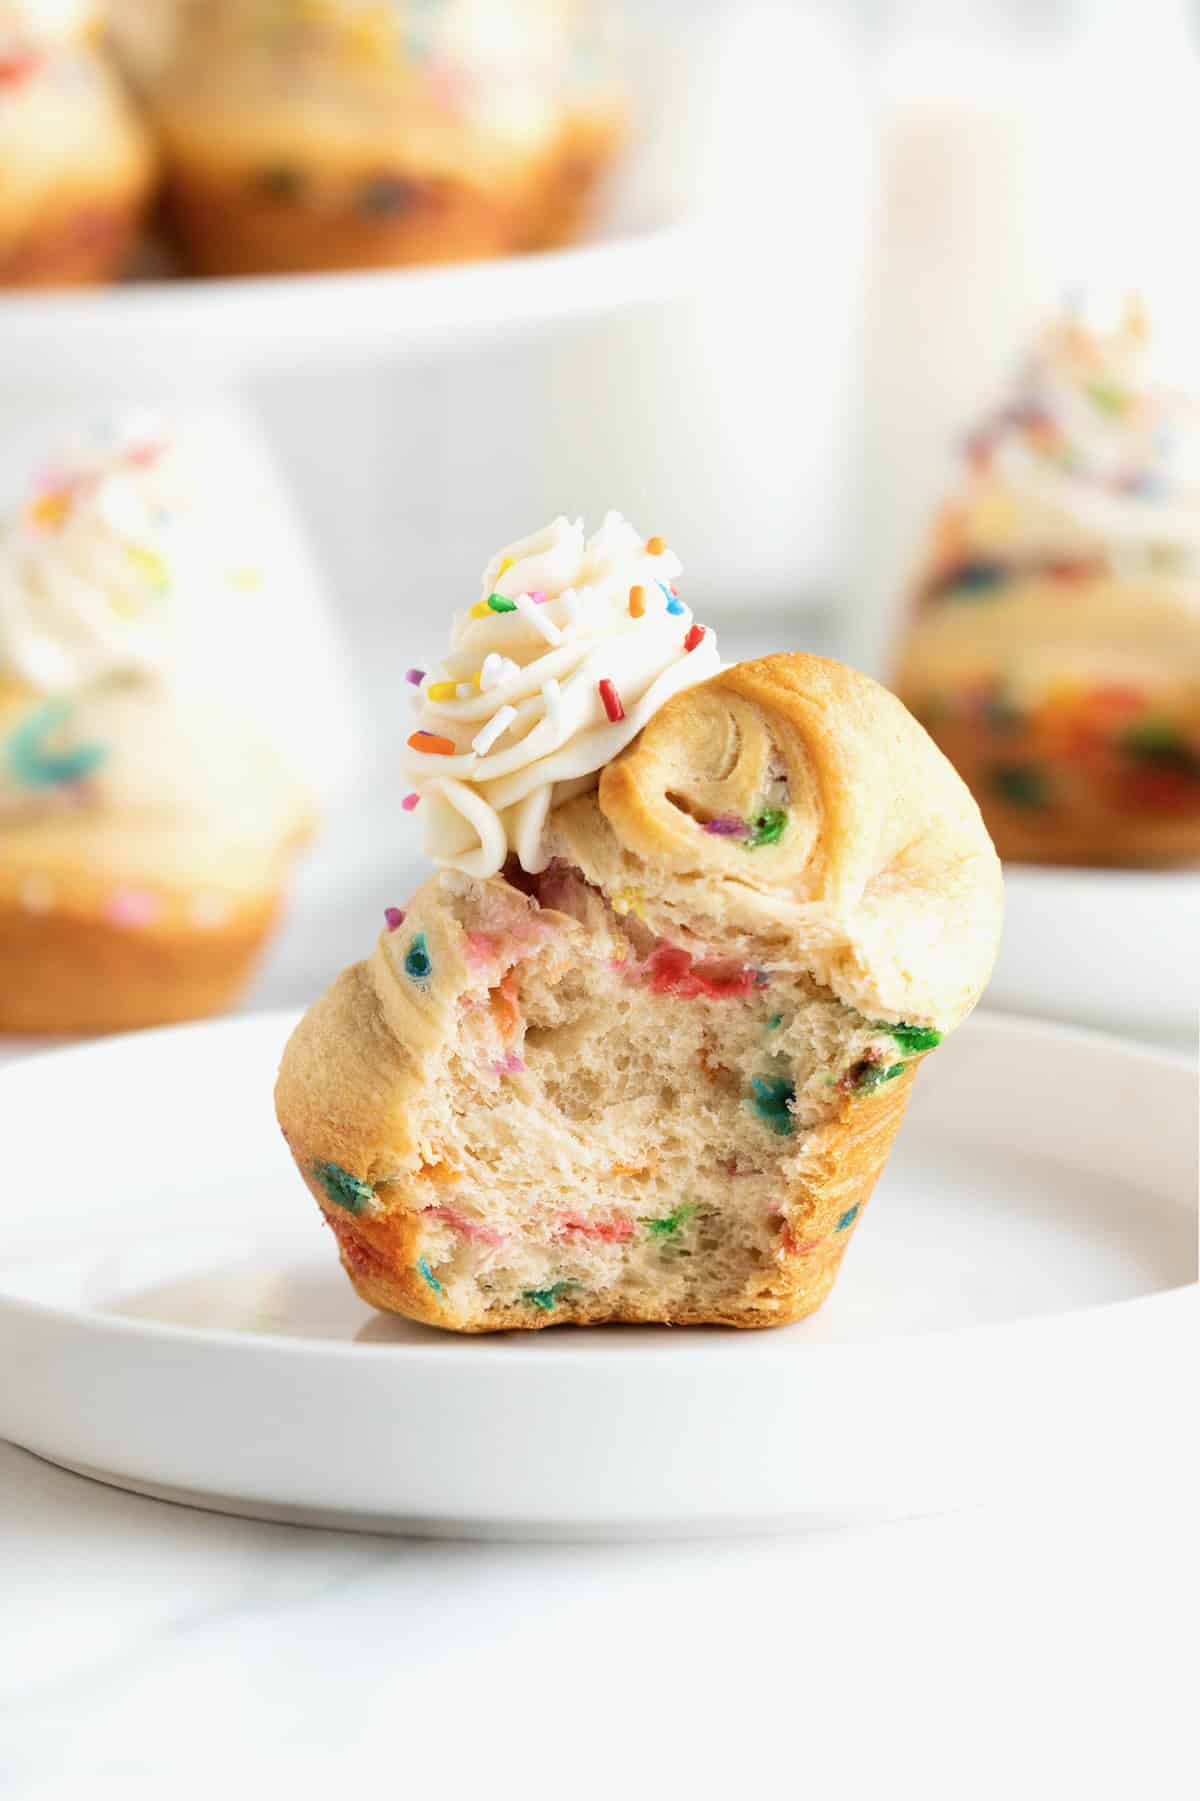 Rainbow sprinkled cruffins topped with simple icing on a white marble counter. There is a bite out of the forward most cruffin.